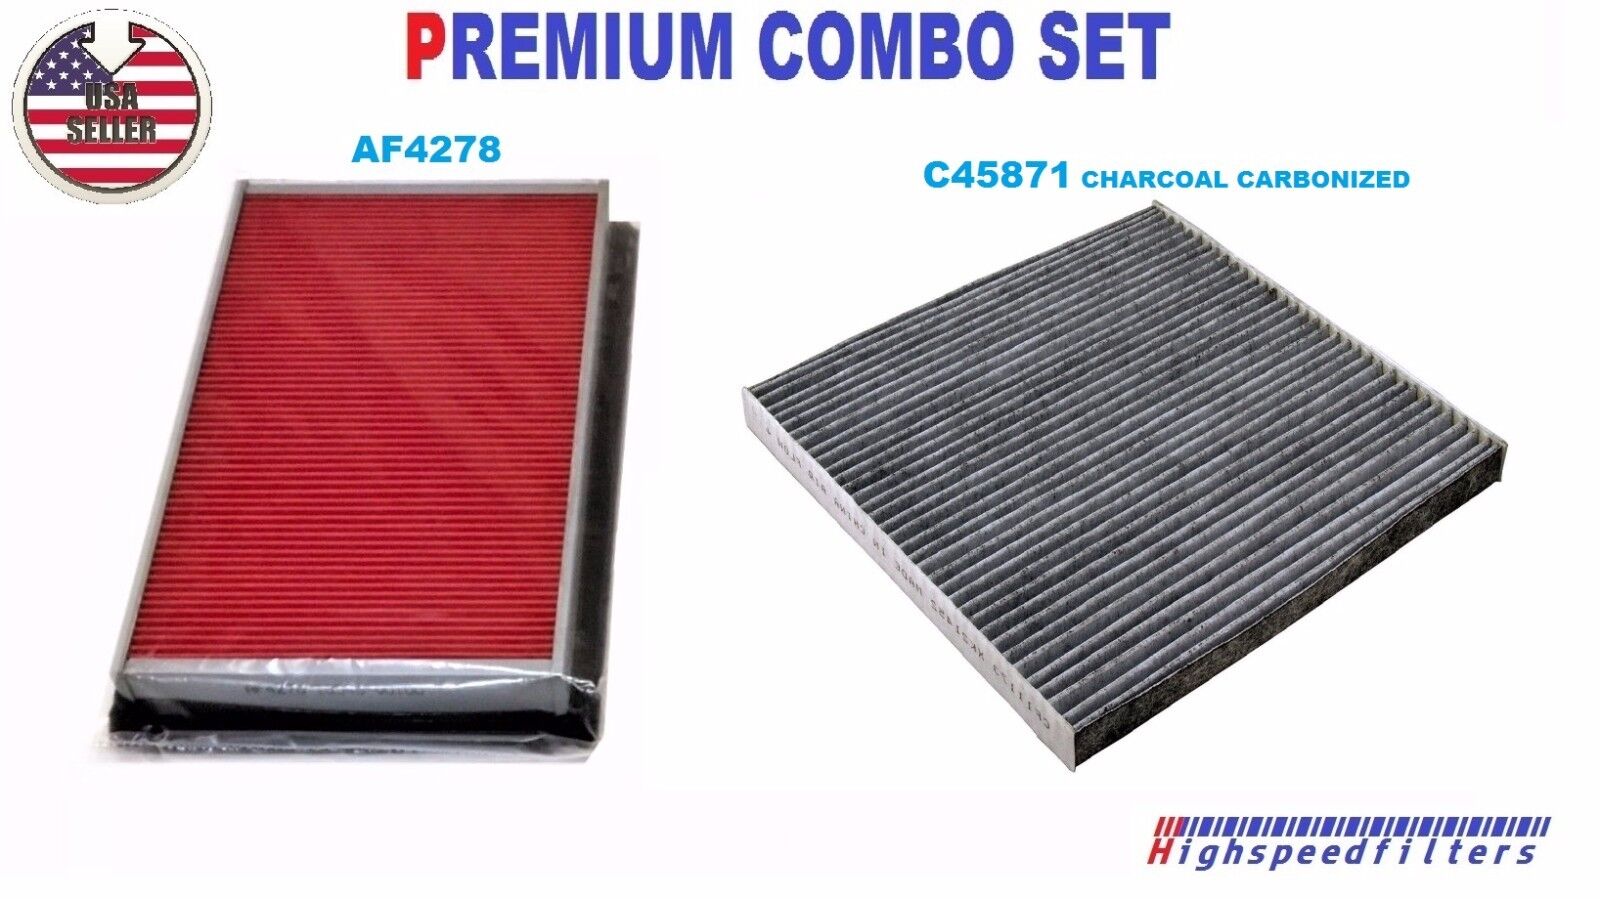 COMBO Engine & CHARCOAL Cabin Air Filter set for ALTIMA V6 MAXIMA MURANO QUEST